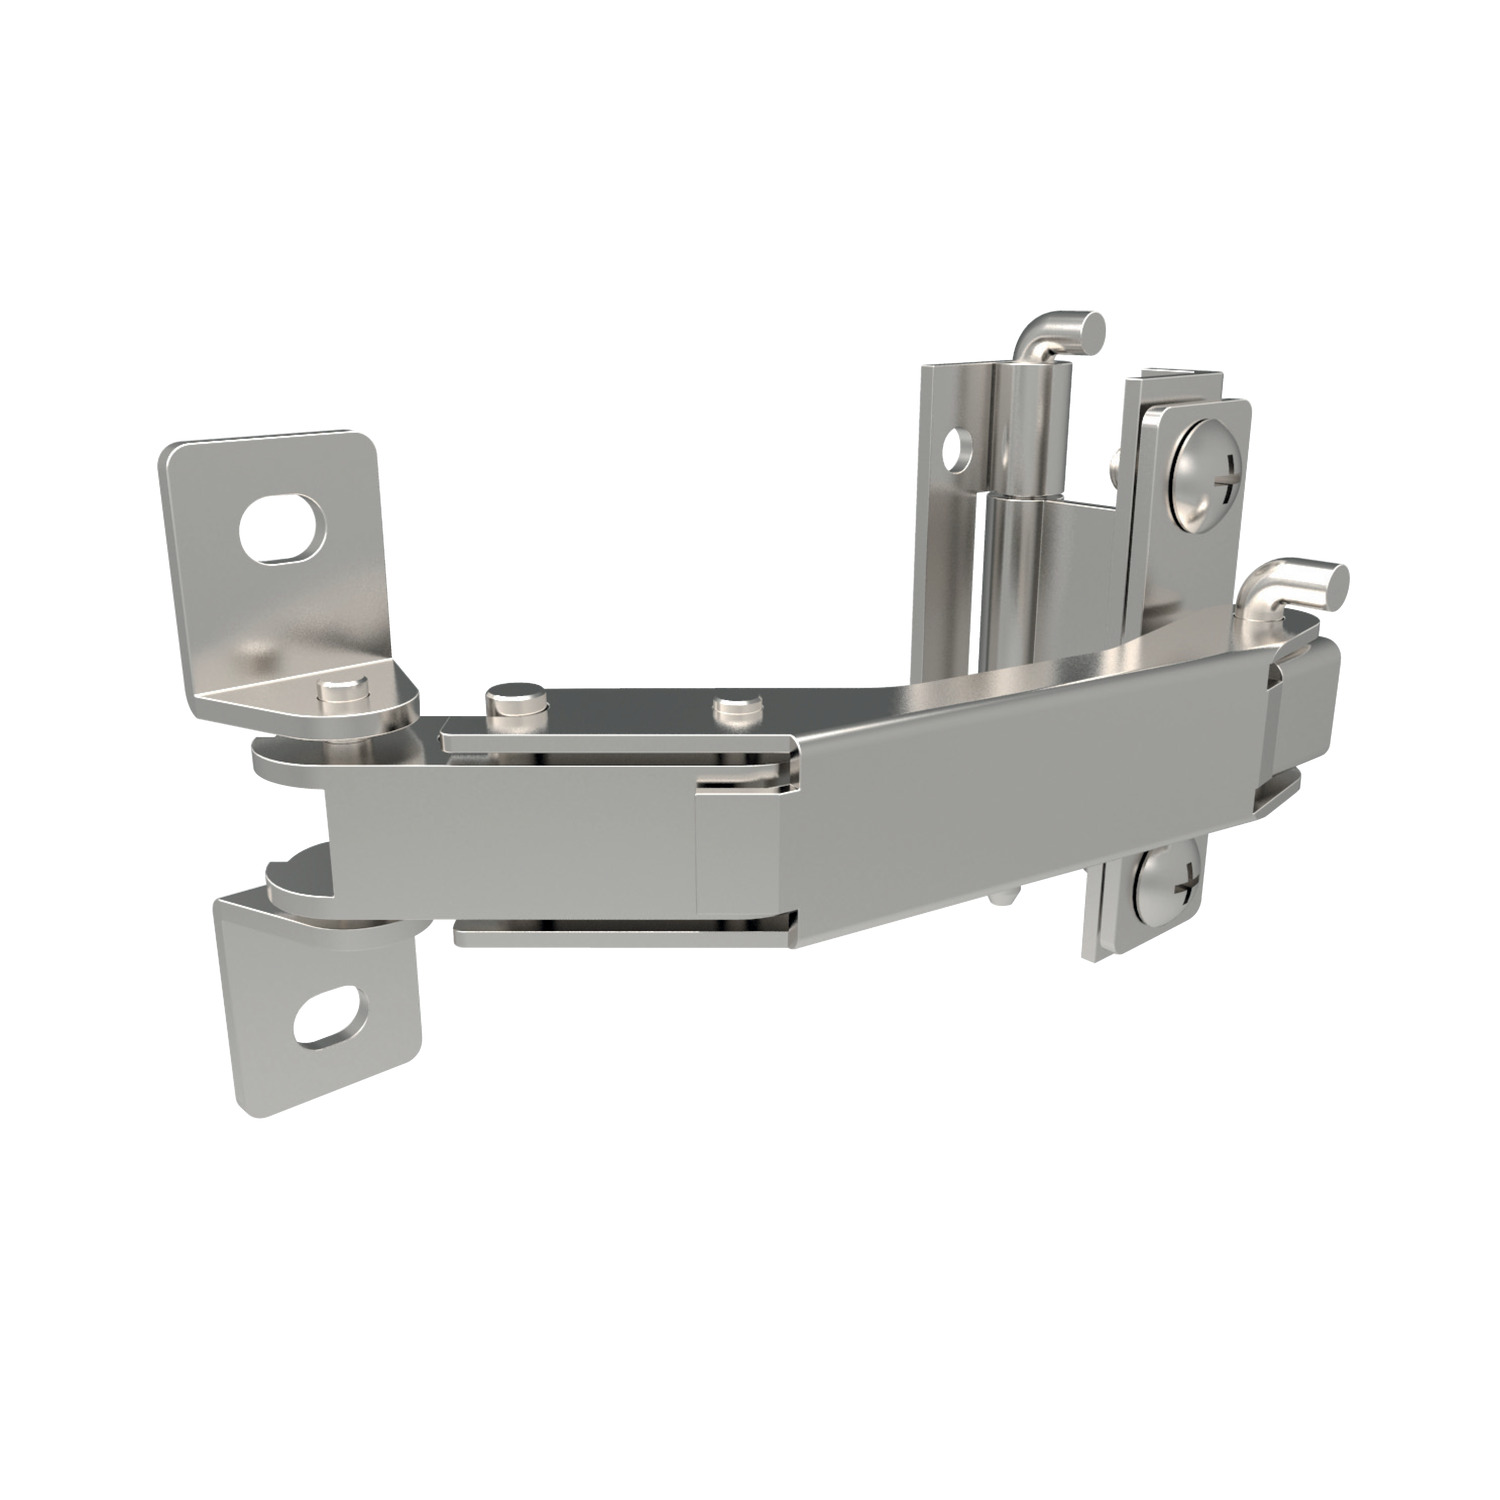 S2250 - Concealed Pivot Hinges - Integral Stay